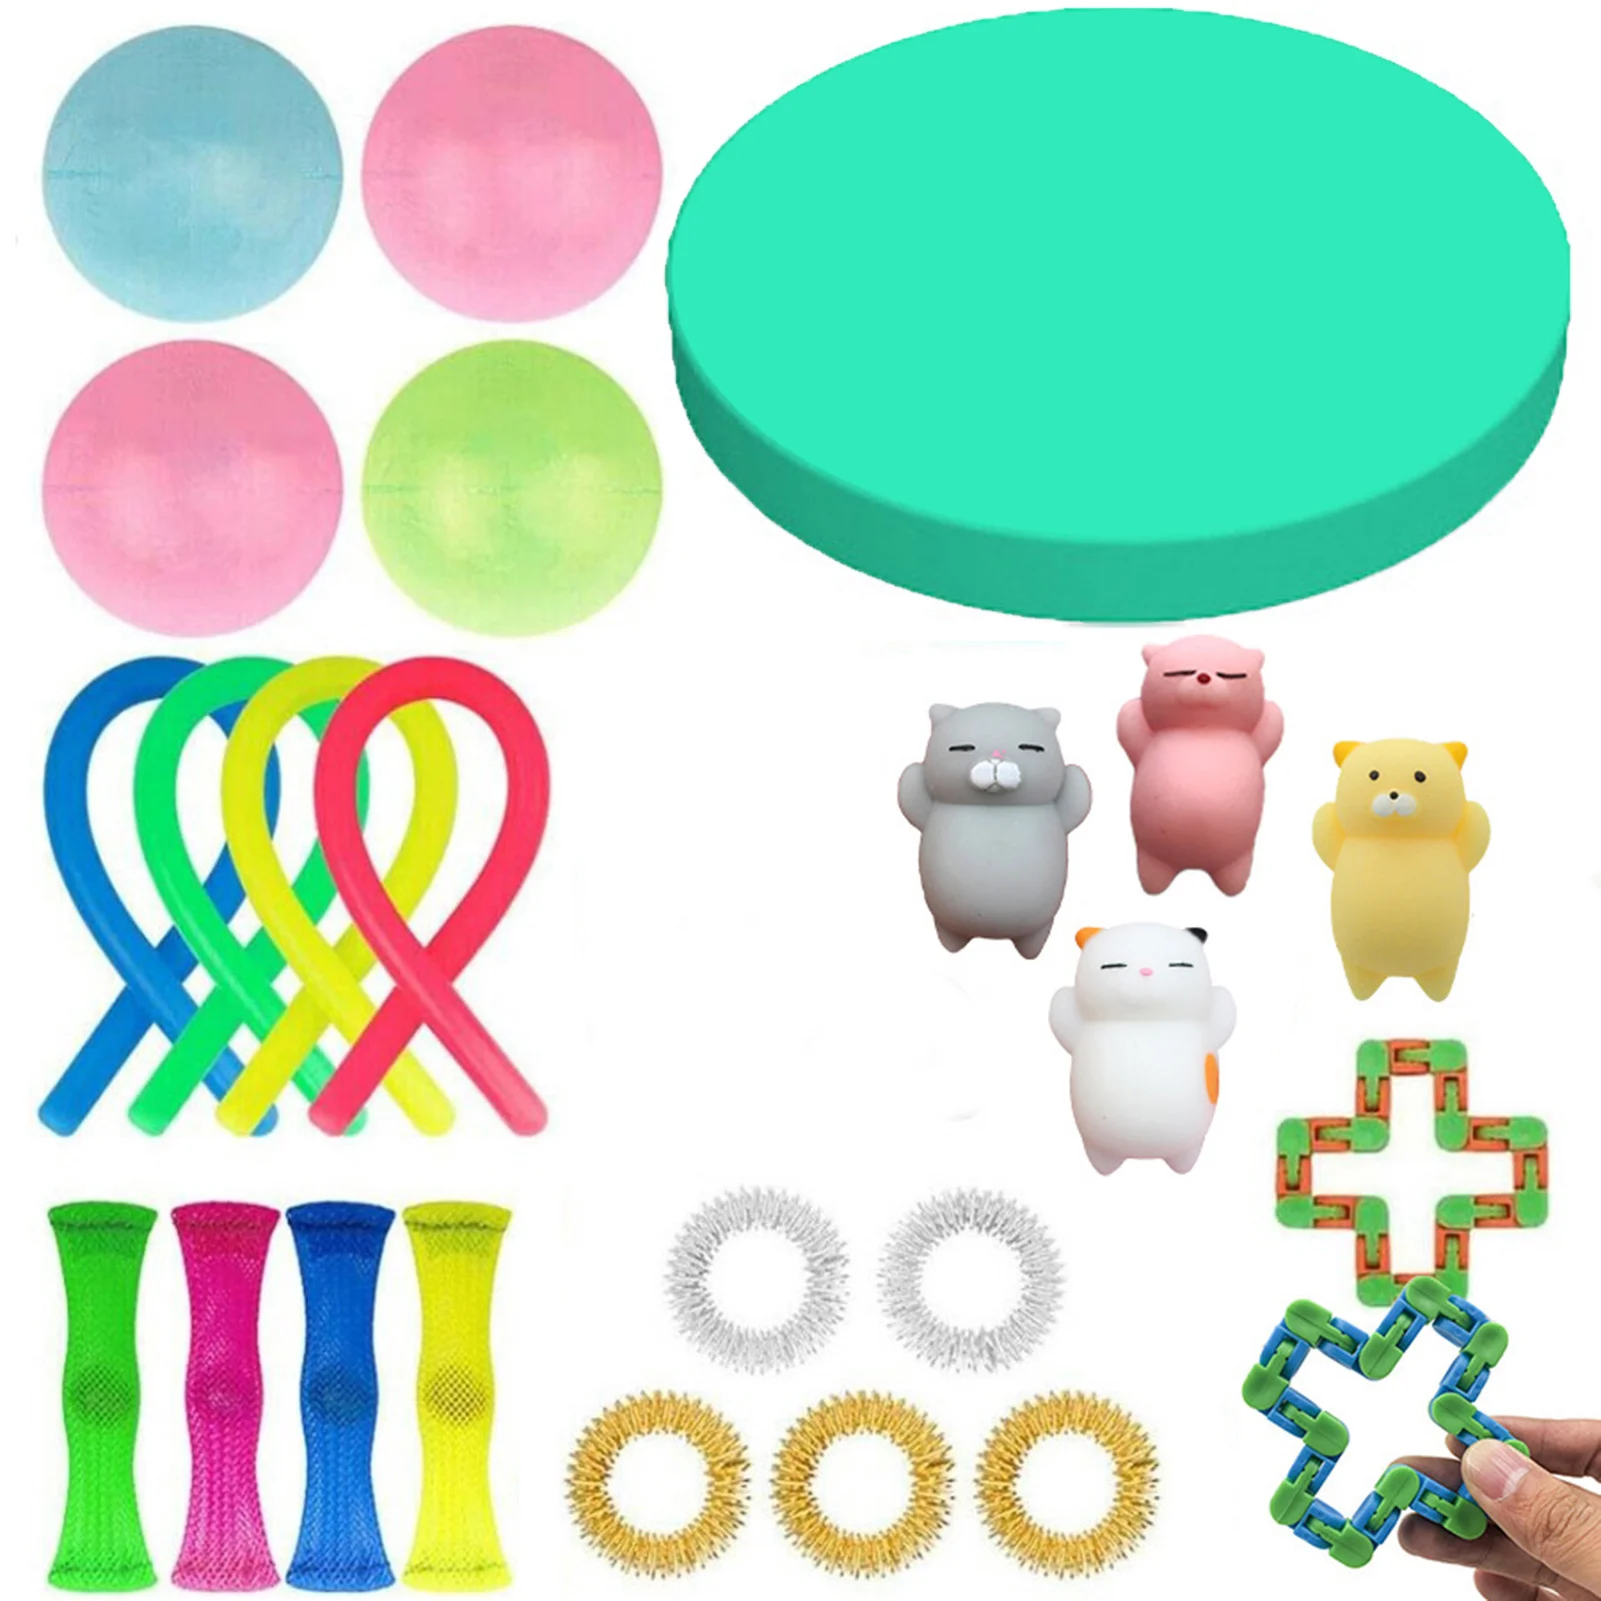 Enlarge 25 IN 1 Fidget Toys Stress Balls Pops Toy Antistress Squeezing Decompression Simple Dimple Toys Pack 18 Years Old Squishy it